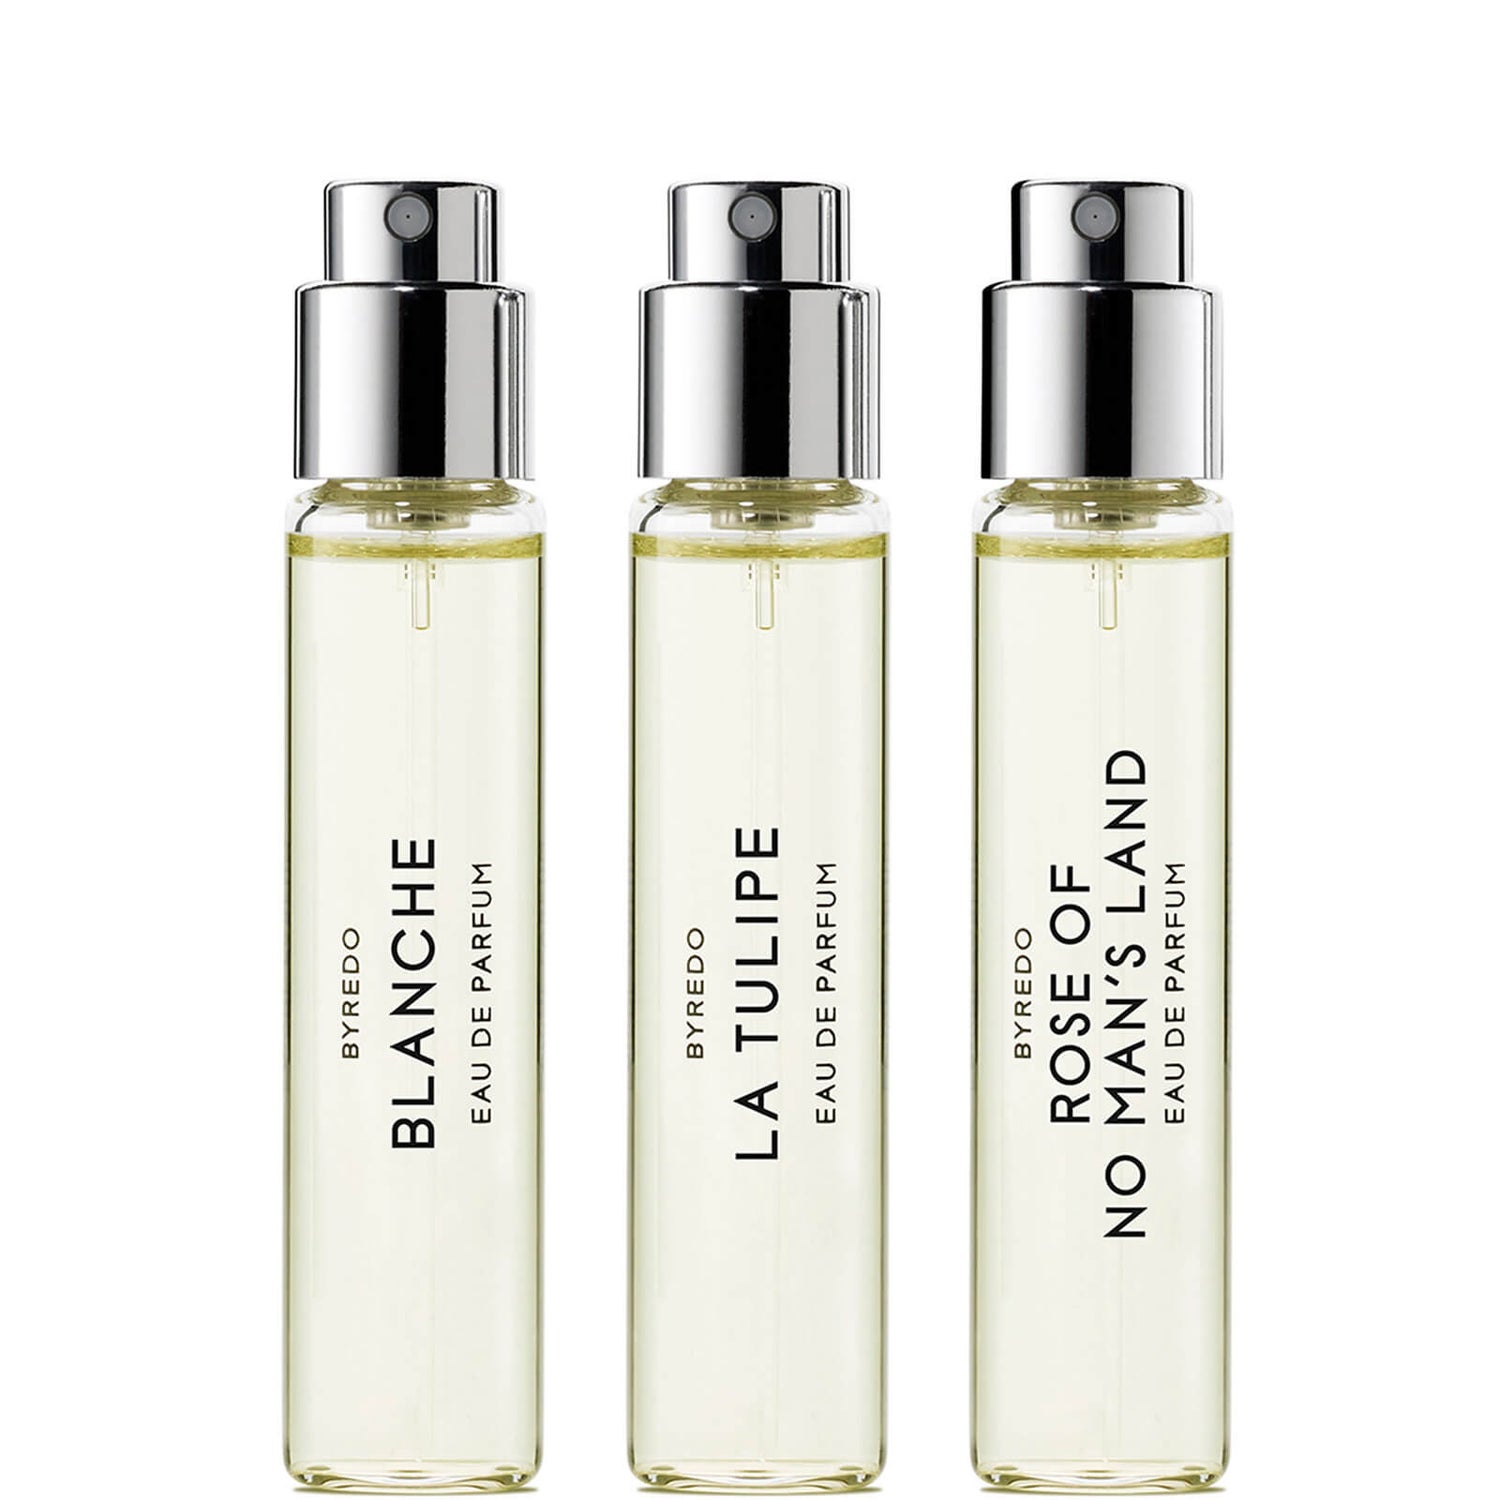 LVMH Perfumes & Cosmetics Produce Free Disinfectants For French hospitals –  OVERSTANDARD – Culture & Creativity